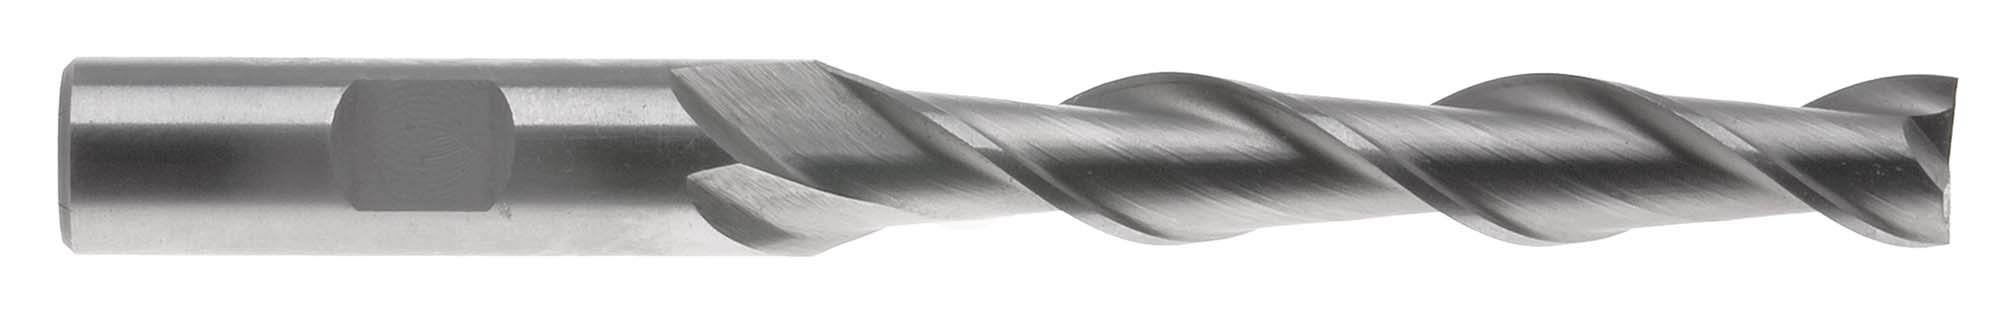 EM-AL14B  7/16"  Extra Long Aluminum Cutting 2 Flute End Mill with High Helix Flutes, 1/2" shank, High Speed Steel